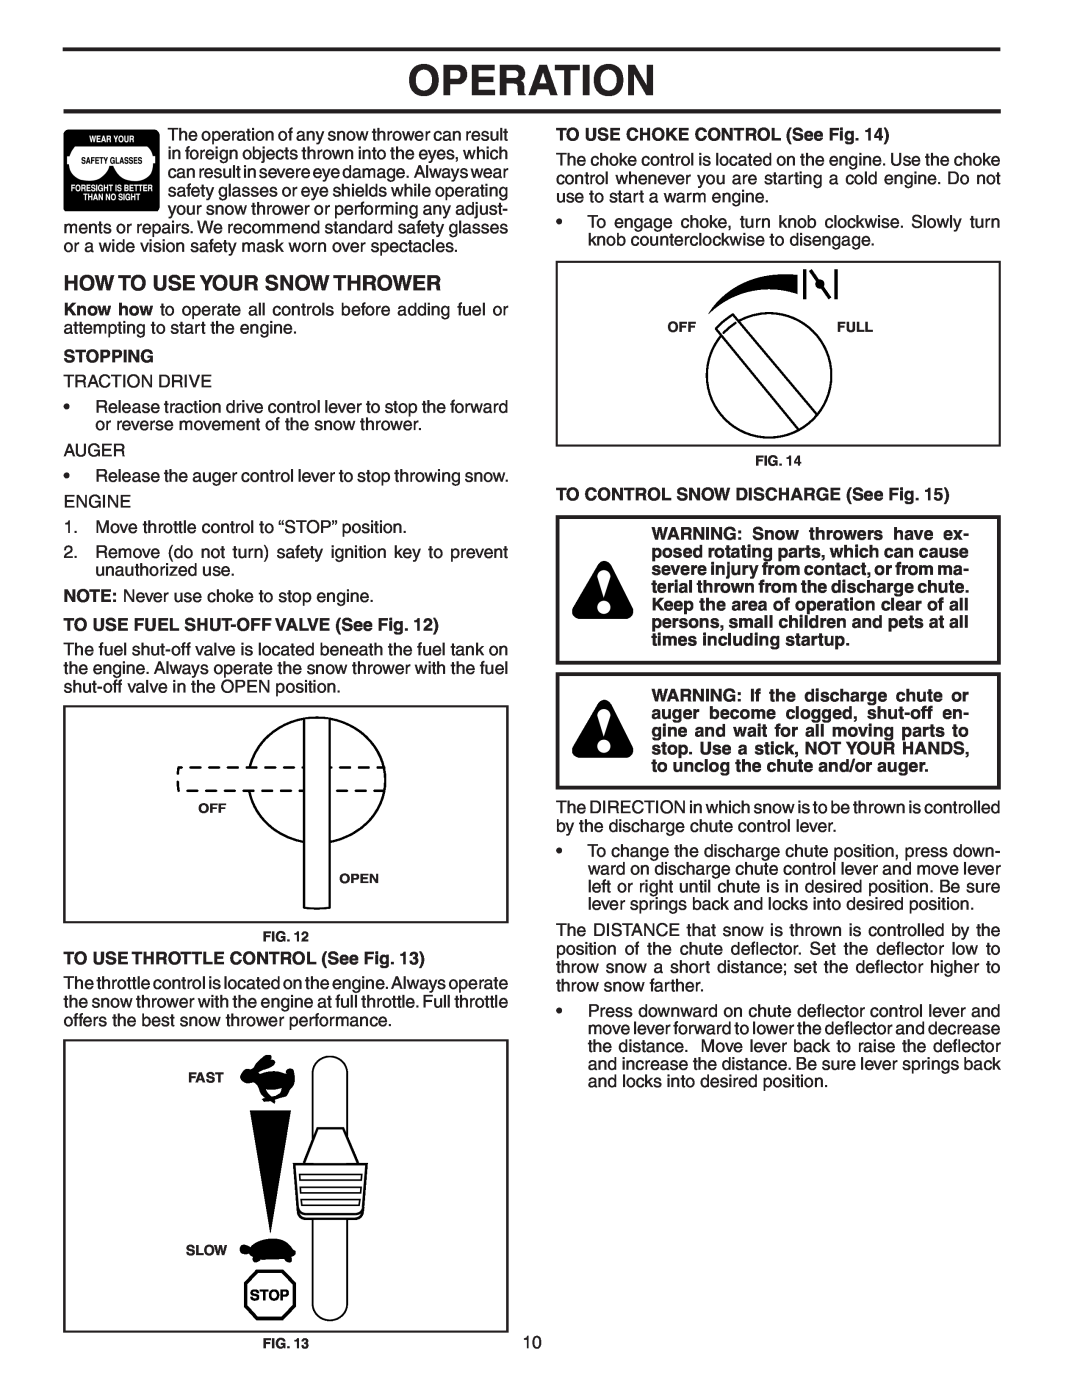 Poulan 185136 owner manual How To Use Your Snow Thrower, Operation, Stopping, TO USE FUEL SHUT-OFF VALVE See Fig 